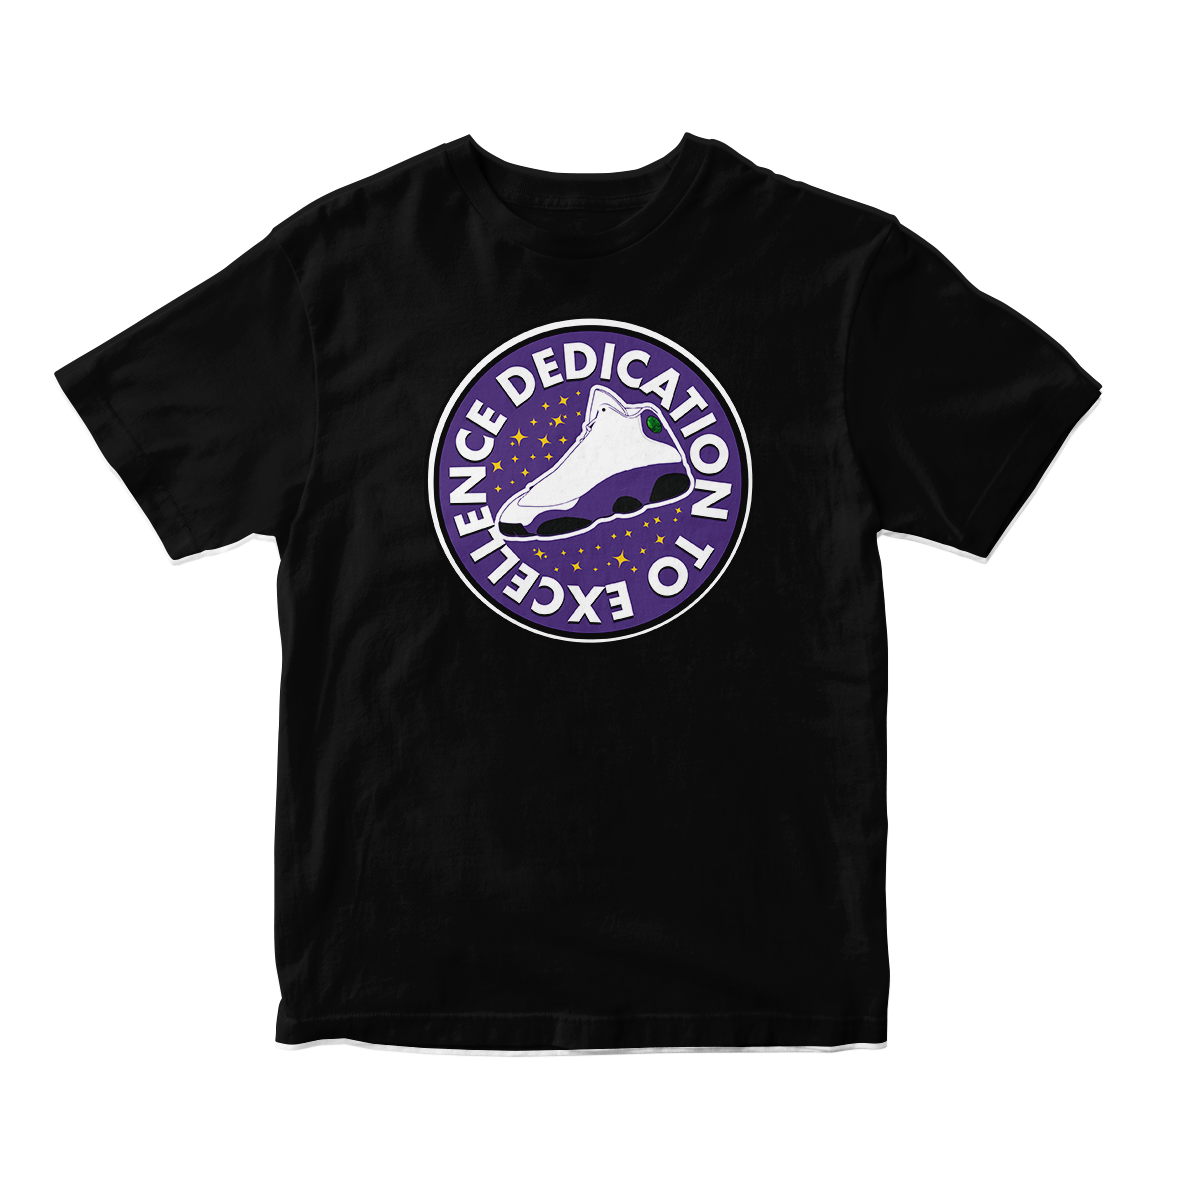 'Dedication To Excellence' in Lakers CW Short Sleeve Tee